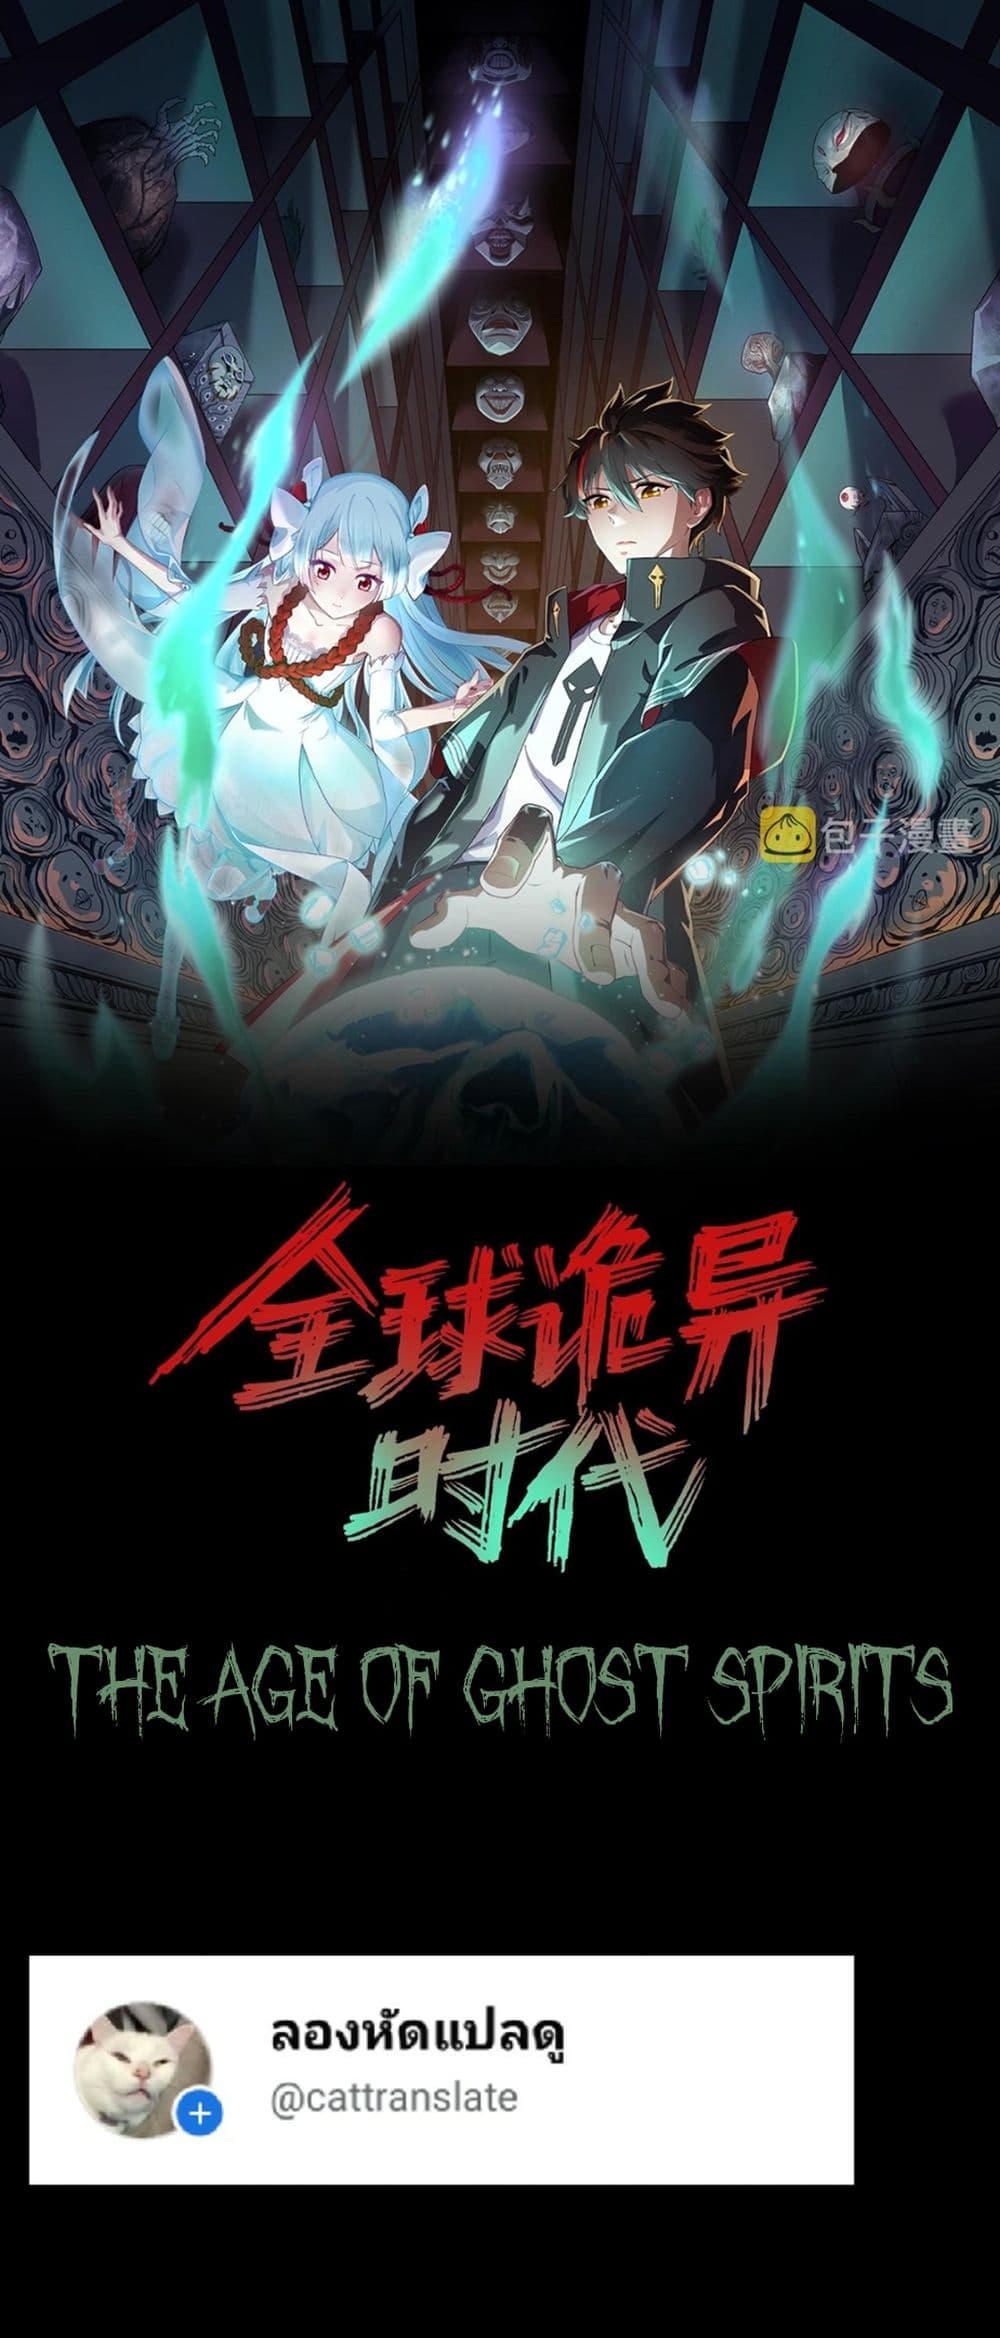 The Age of Ghost Spirits à¸à¸­à¸à¸à¸µà¹ 49 (1)